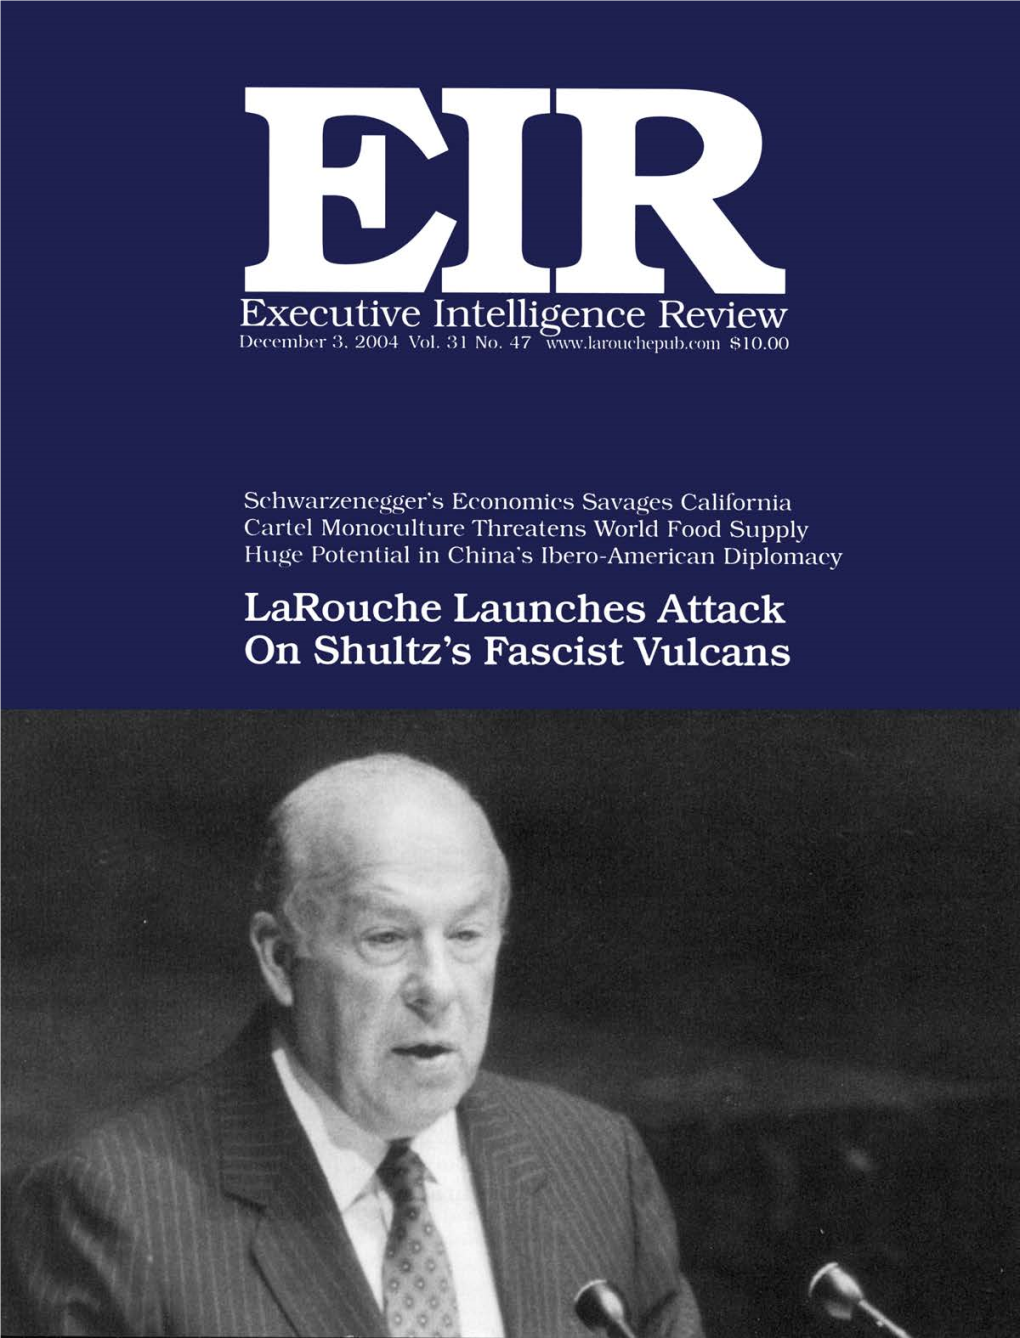 Executive Intelligence Review, Volume 31, Number 47, December